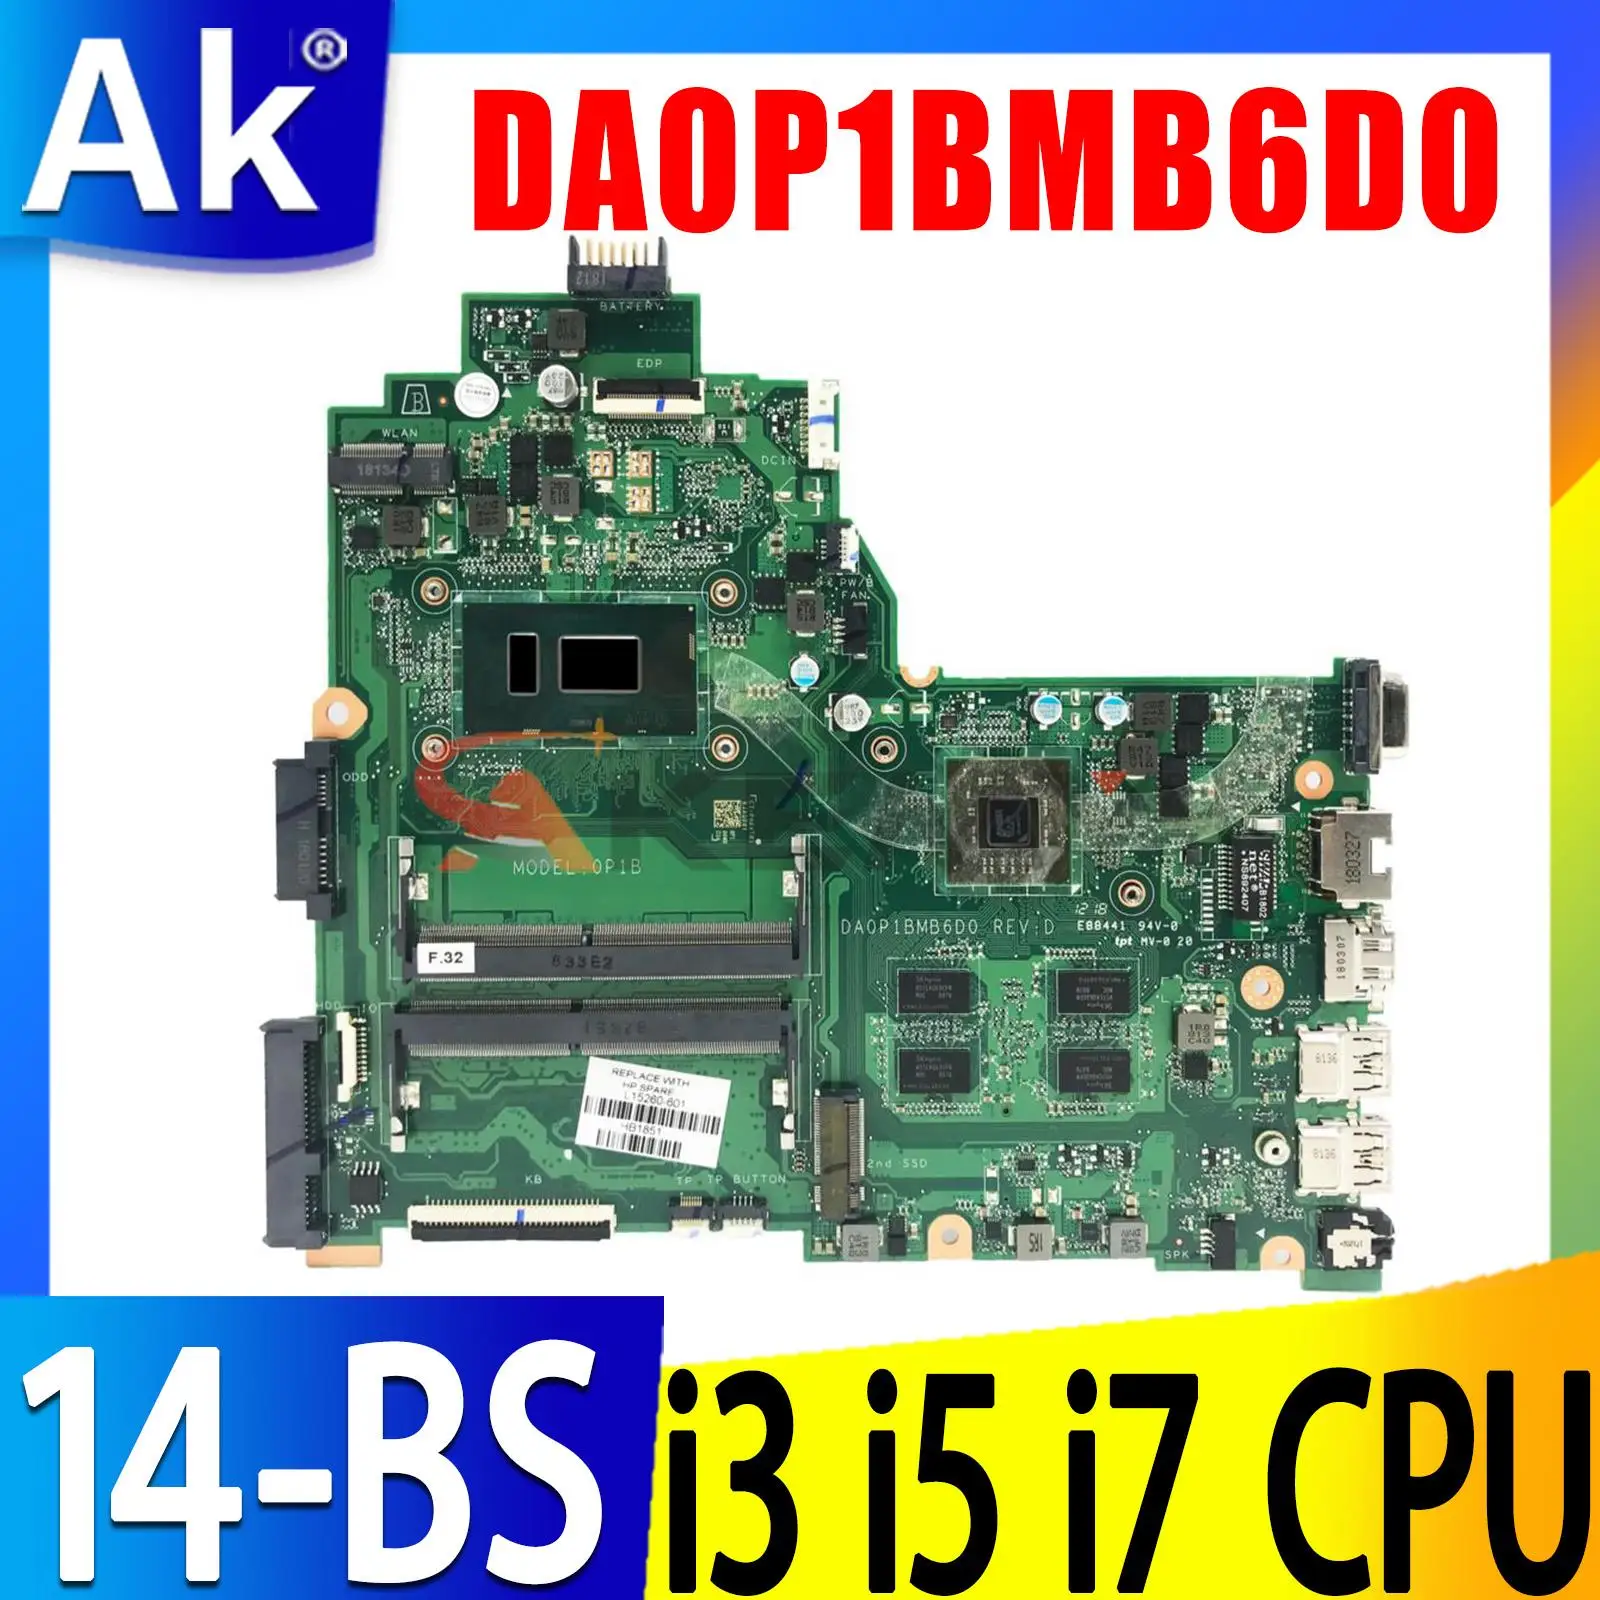 

For HP 14-BS 240 G6 Series Laptop Motherboard DA0P1BMB6D0 with 4405U I3 I5 I7 CPU Mainboard 925423-001 925430-601 925431-001